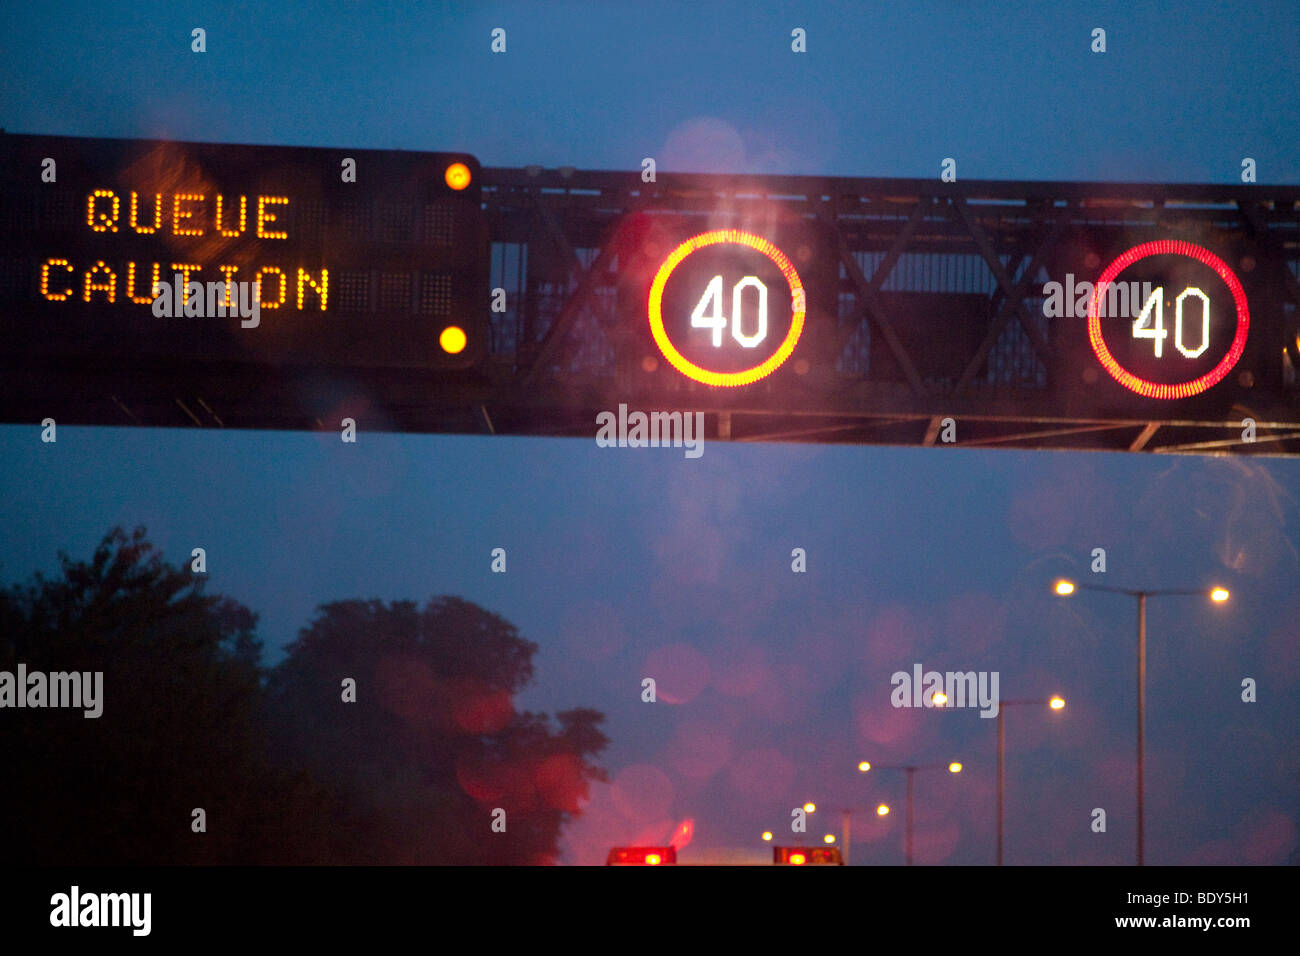 Reduced speed lights on overhead gantry on motorway to inform drivers of queuing traffic, England. Stock Photo